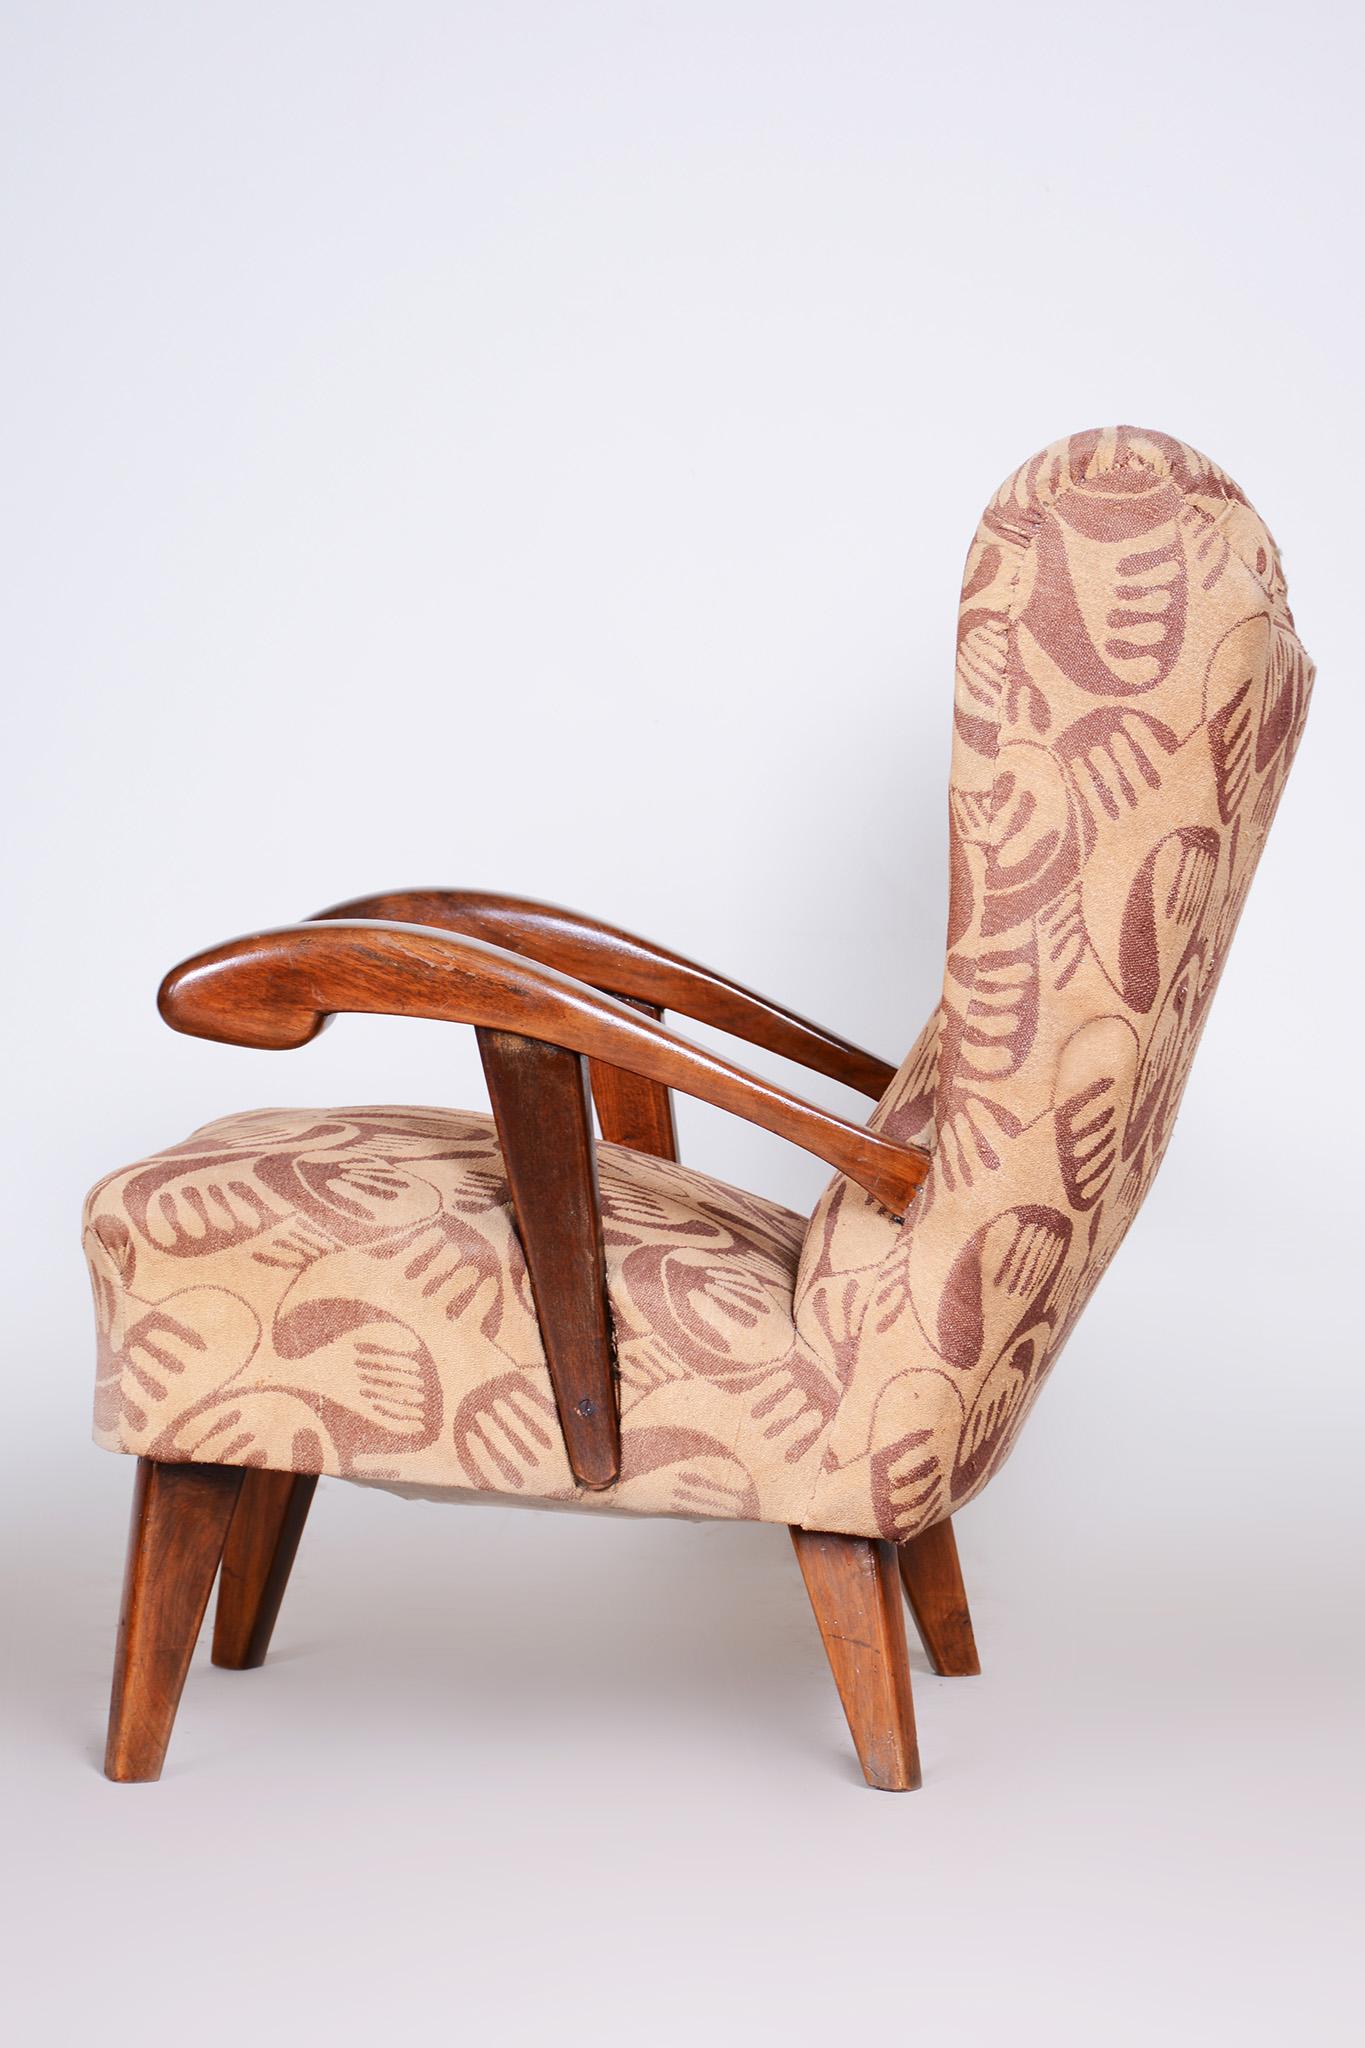 Brown Art Deco Armchair, Made in 1930s Czechia For Sale 3